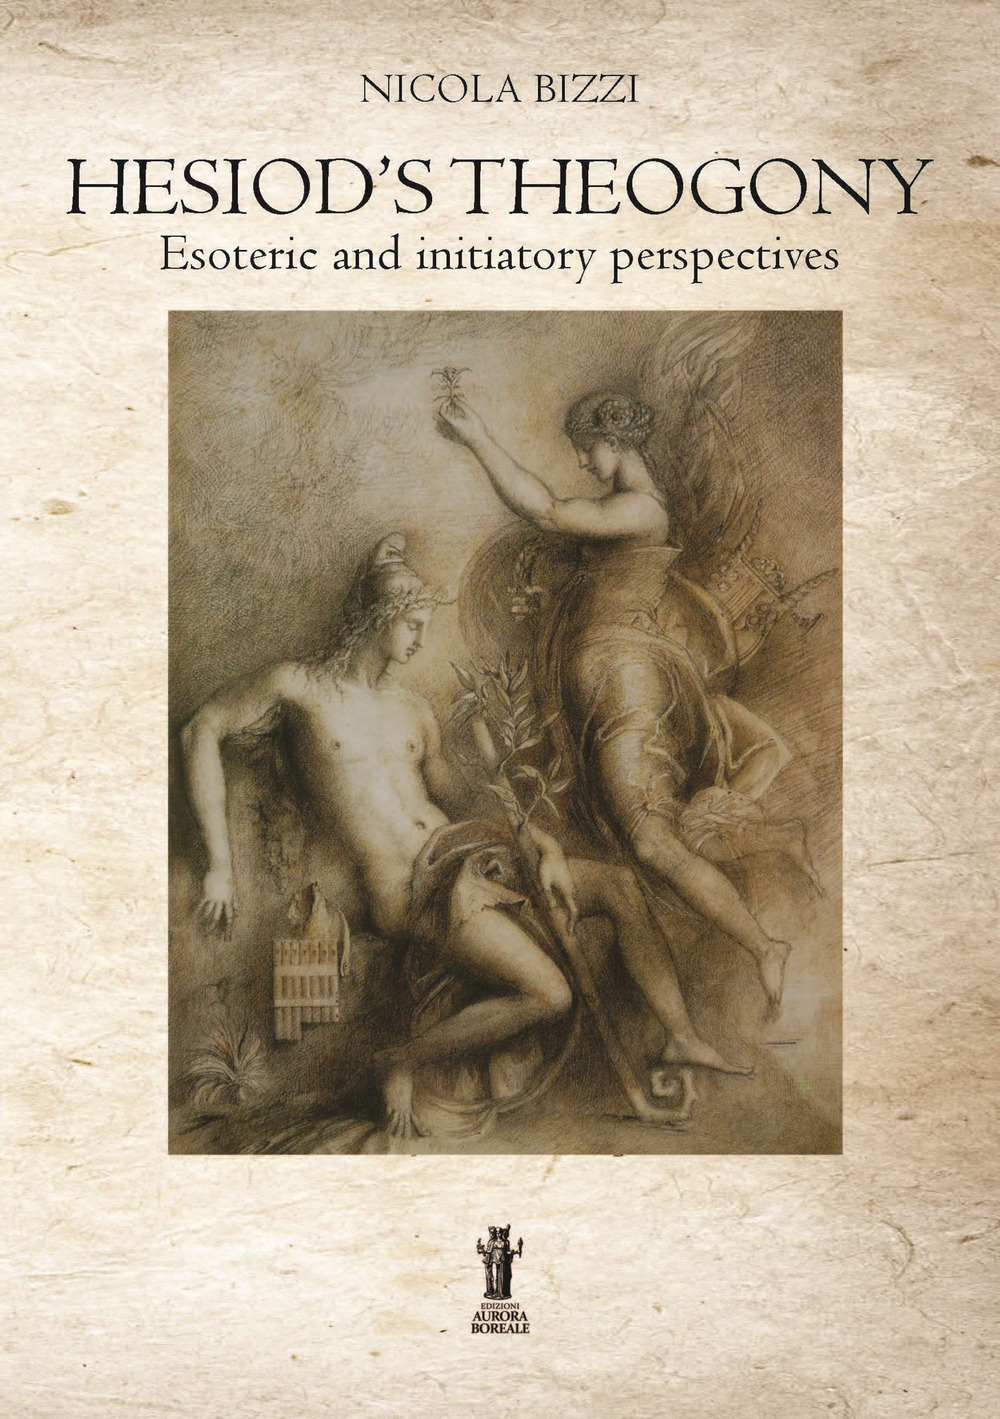 Hesiod's theogony: esoteric and initiatory perspectives